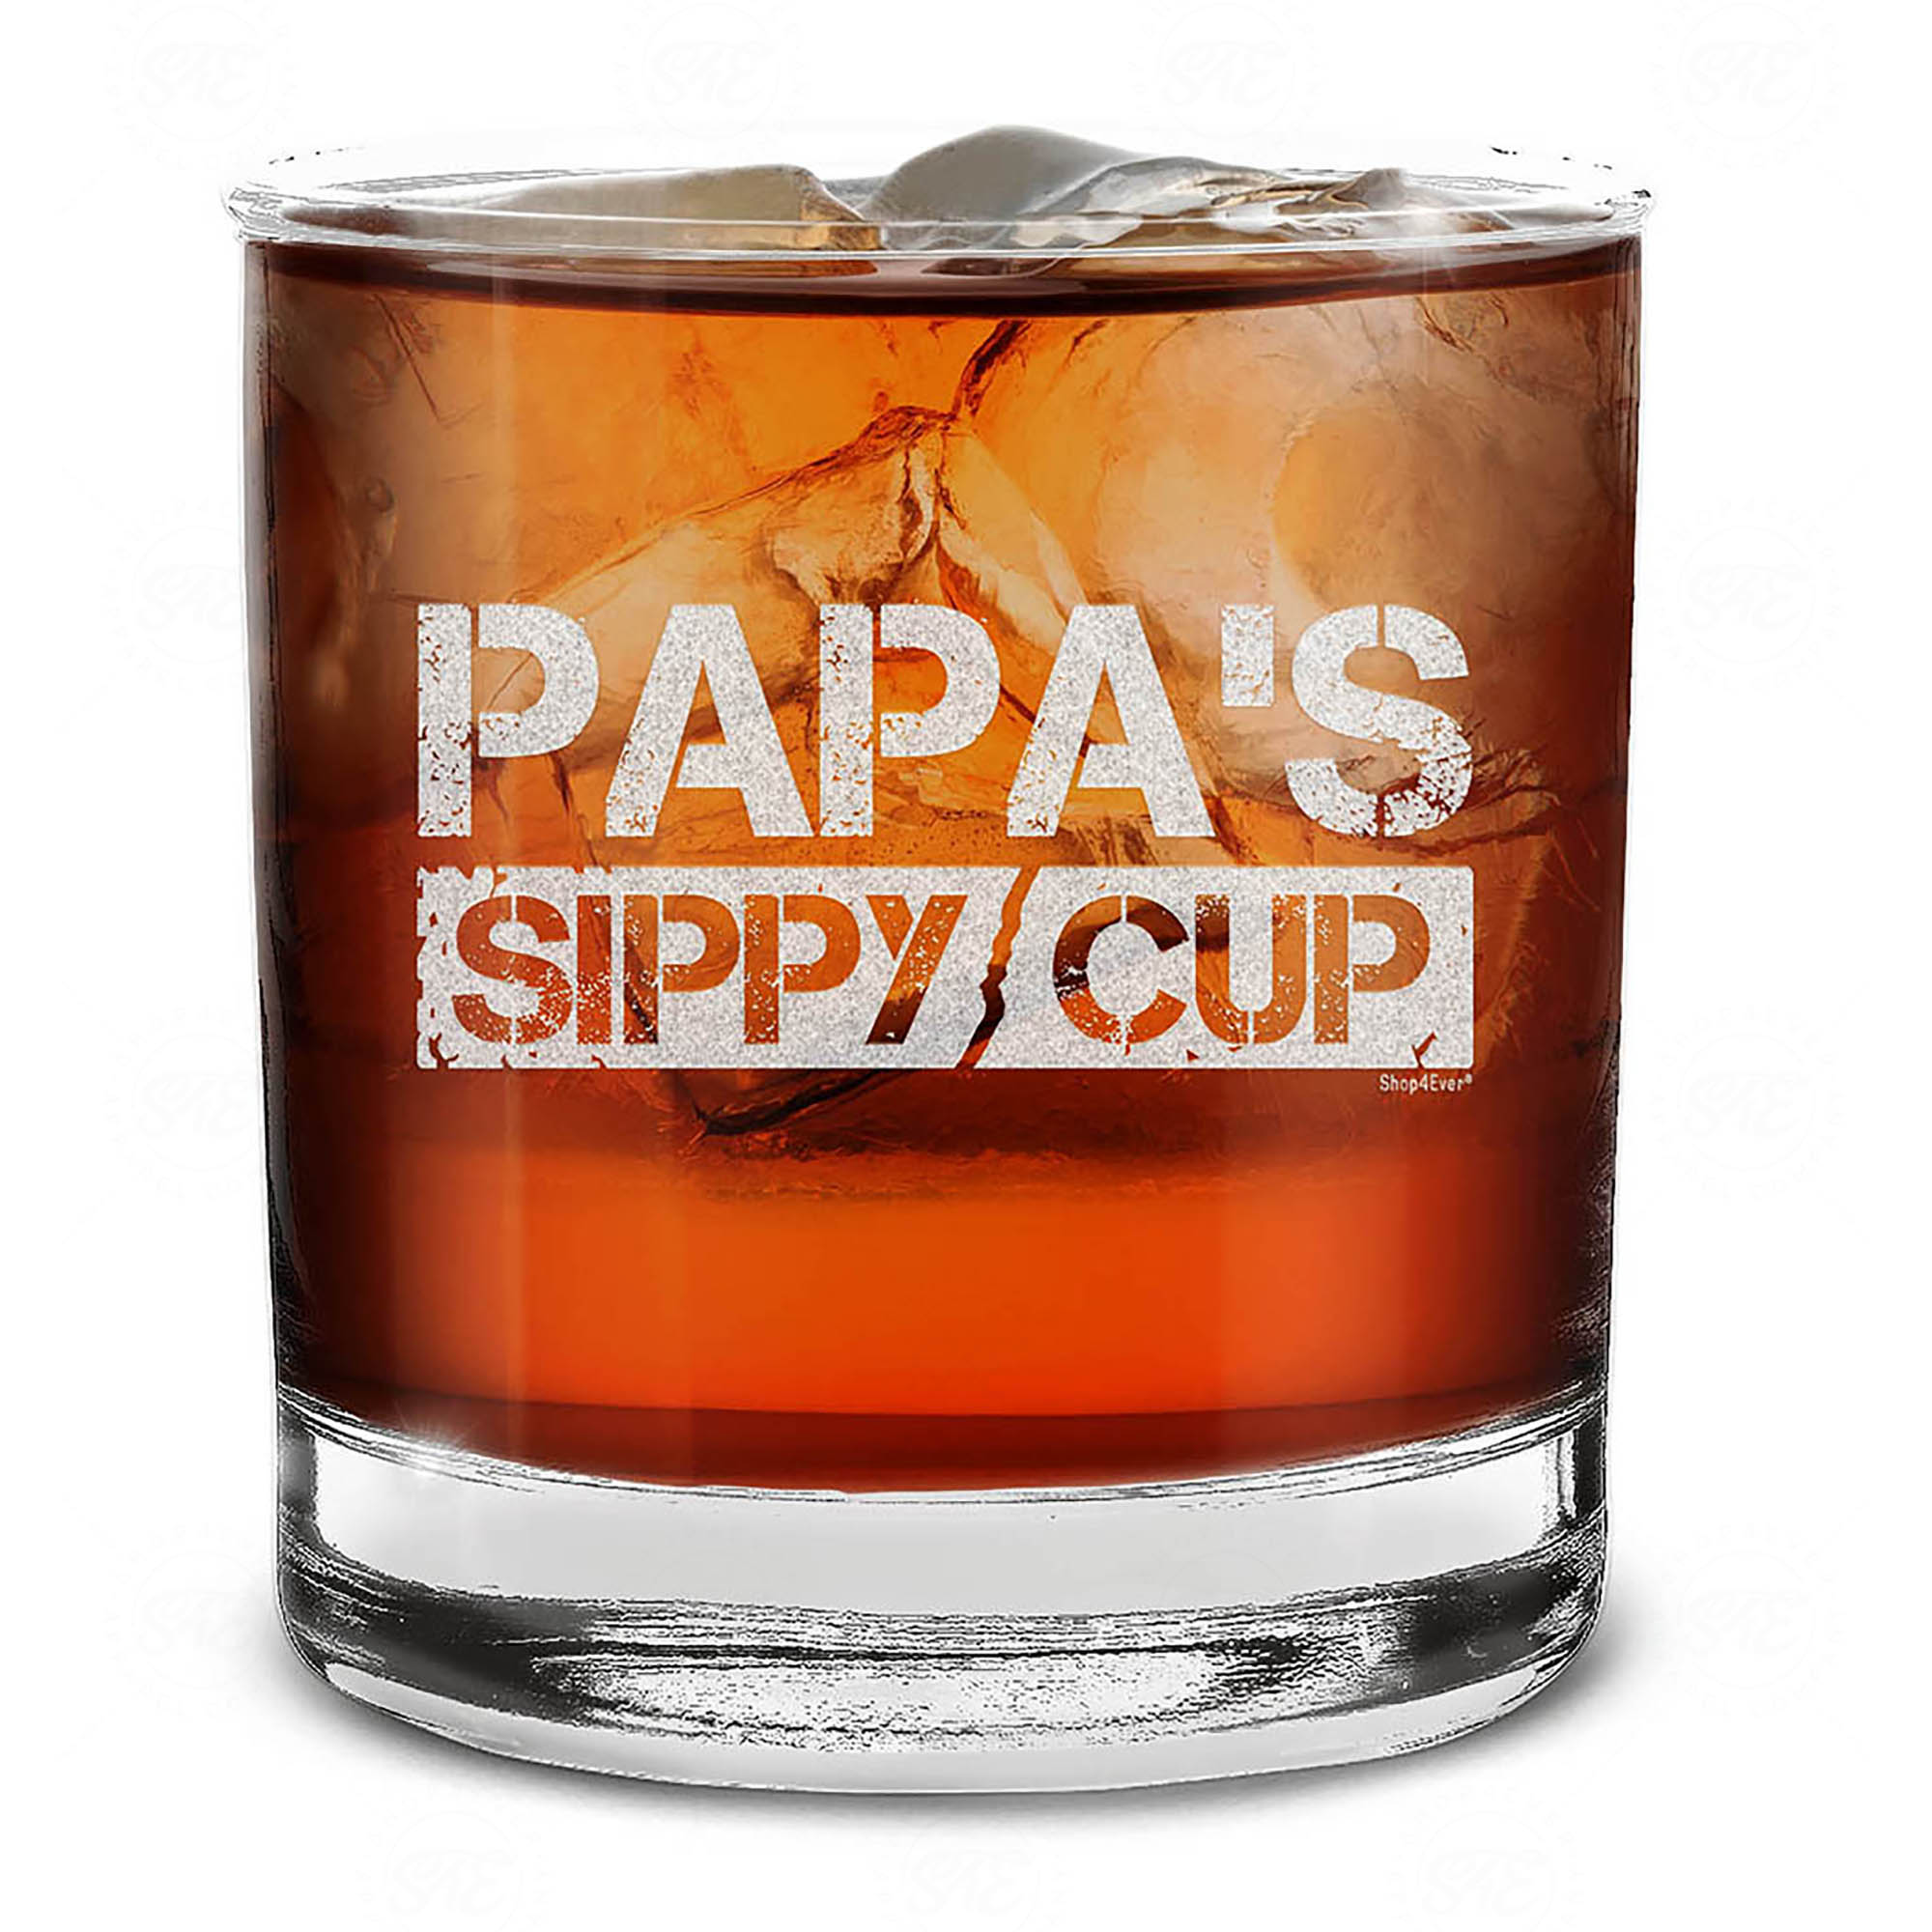 Papa's Sippy Cup Engraved Whiskey Glass Pregnancy Announcement for Grandpa Dad Glass